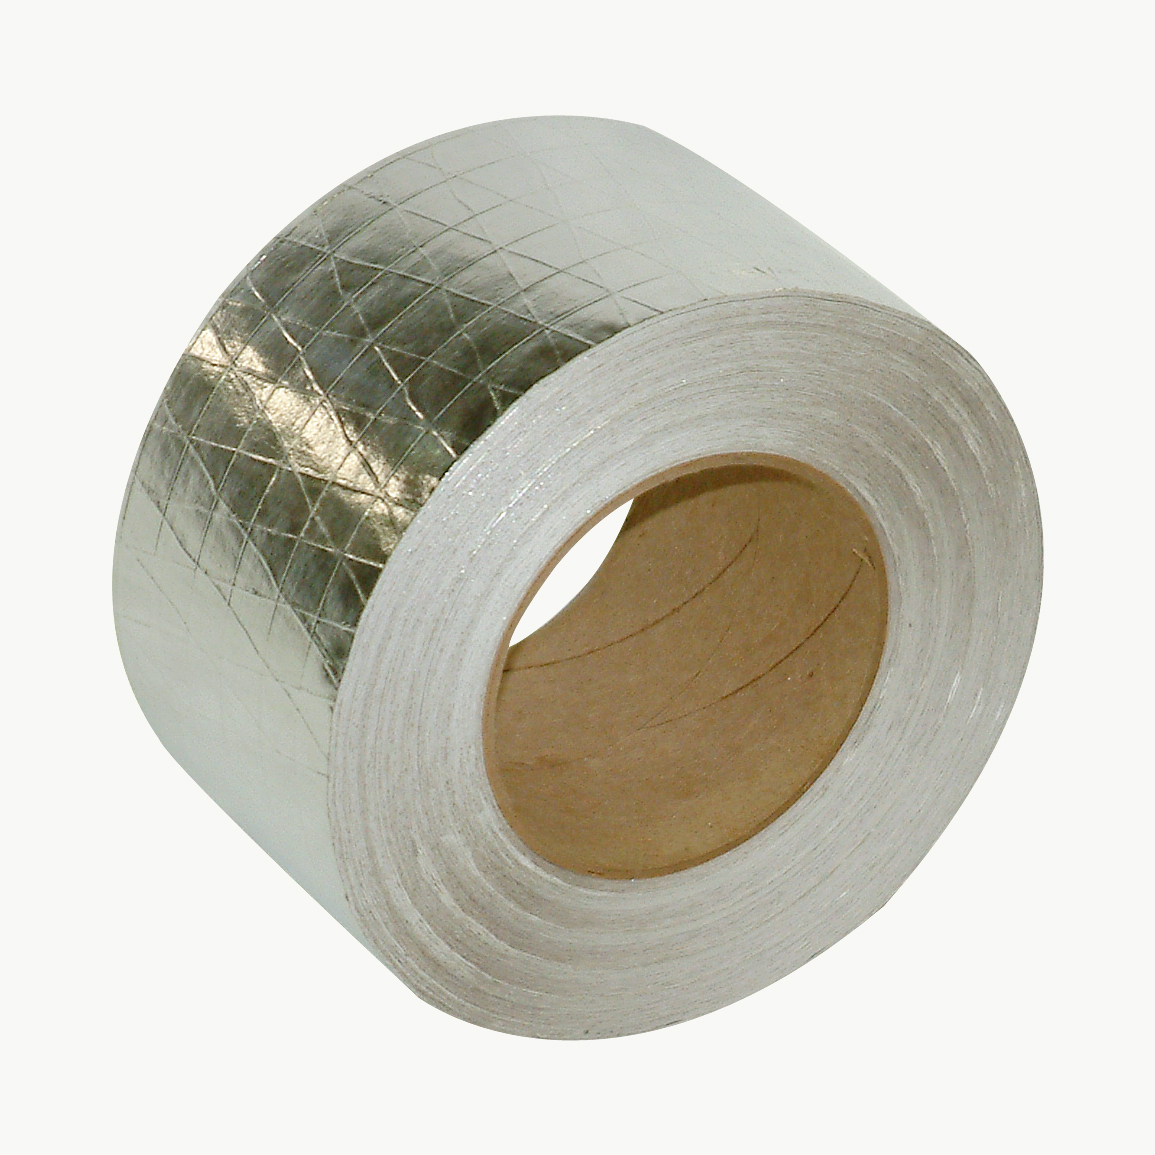 Free Shipping Malleable Foil 4 Rolls Aluminum Foil Tape 3" x 150' With Liner 